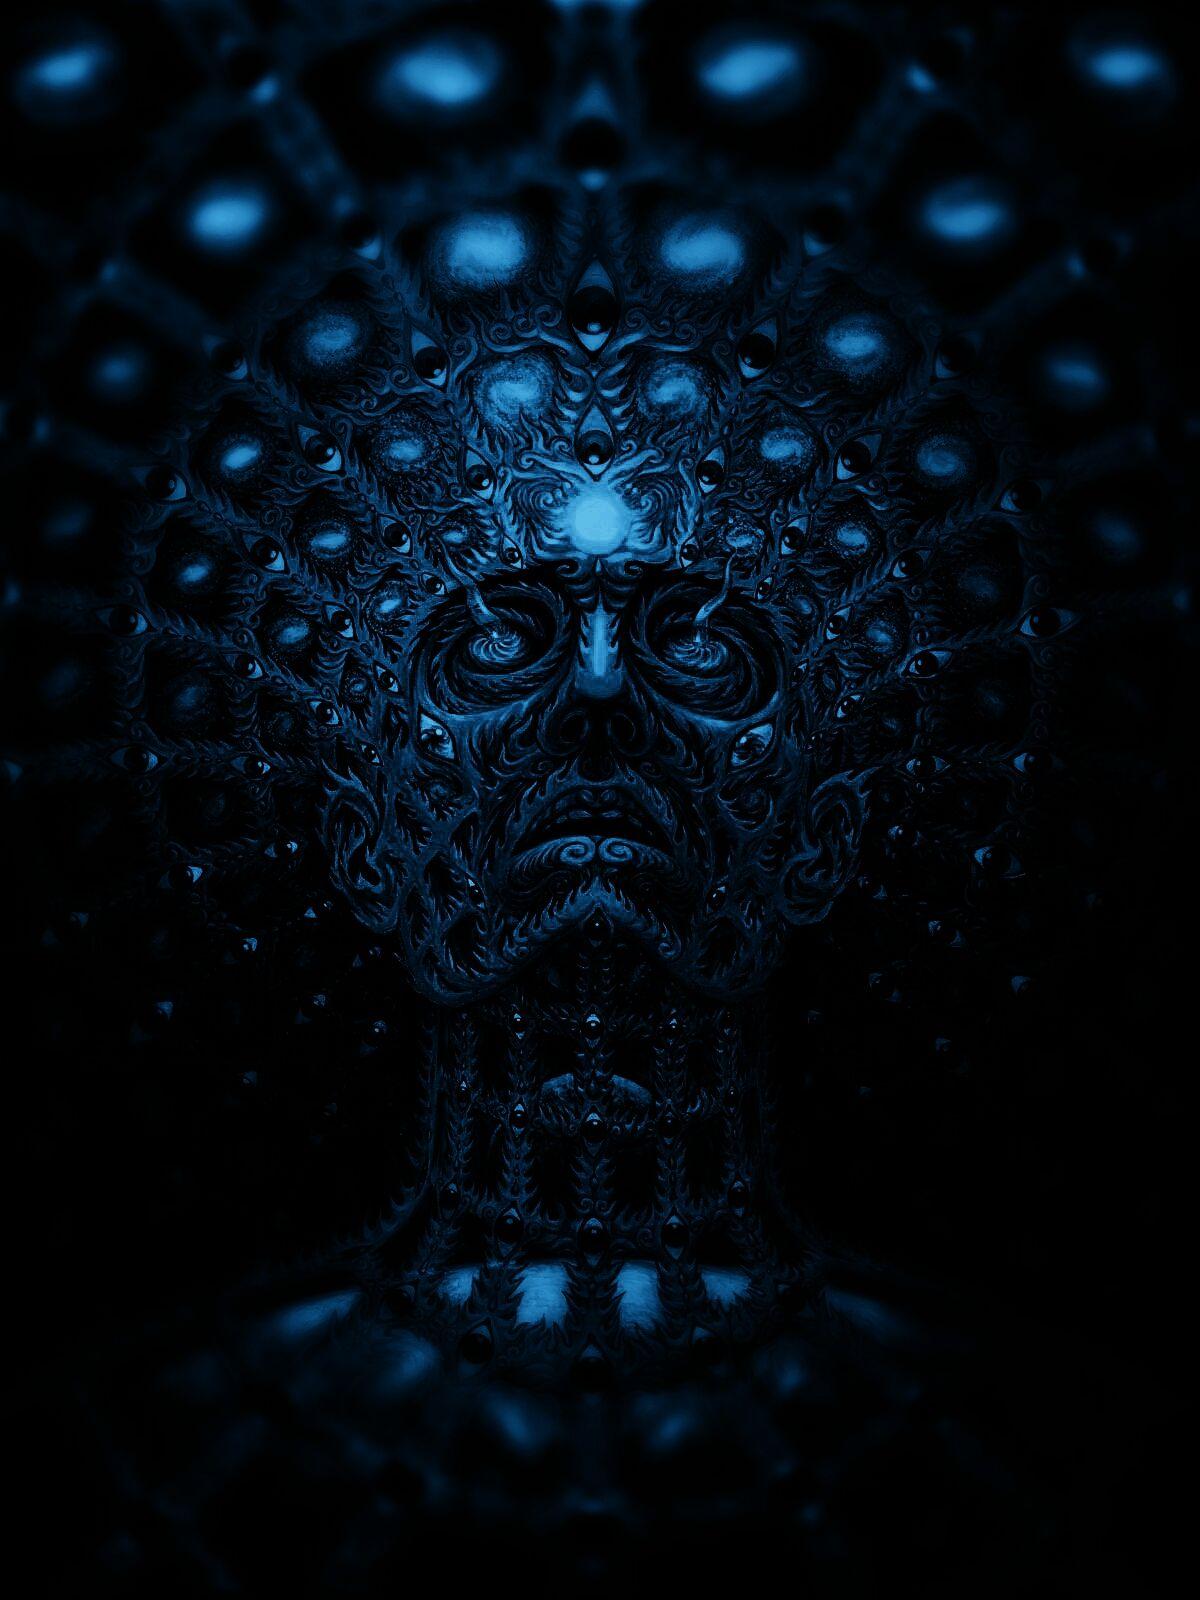 New Tool Wallpaper\Background thread